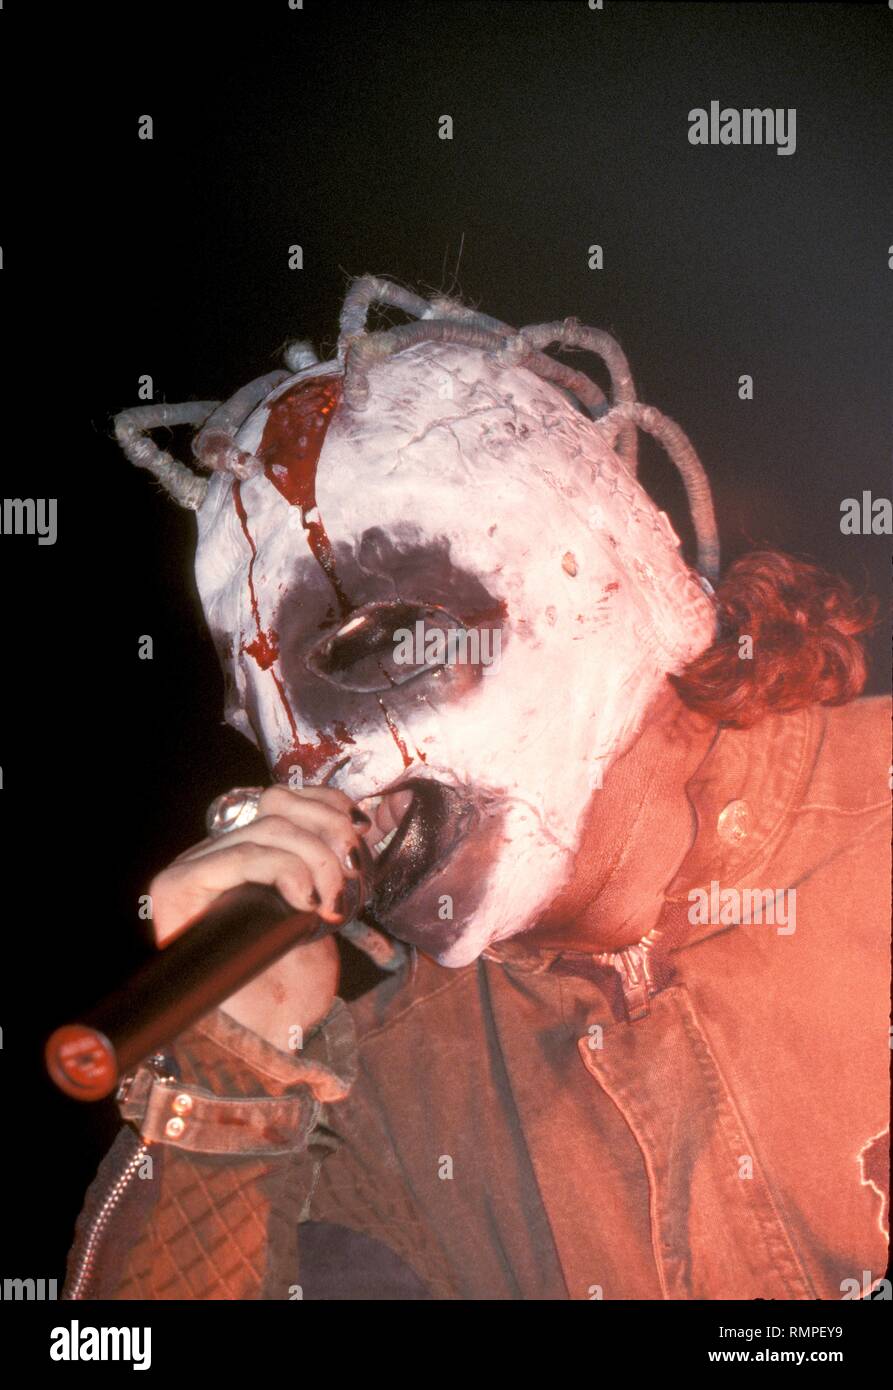 A Slipknot band member is shown performing on stage during a 'live' concert appearance. Stock Photo